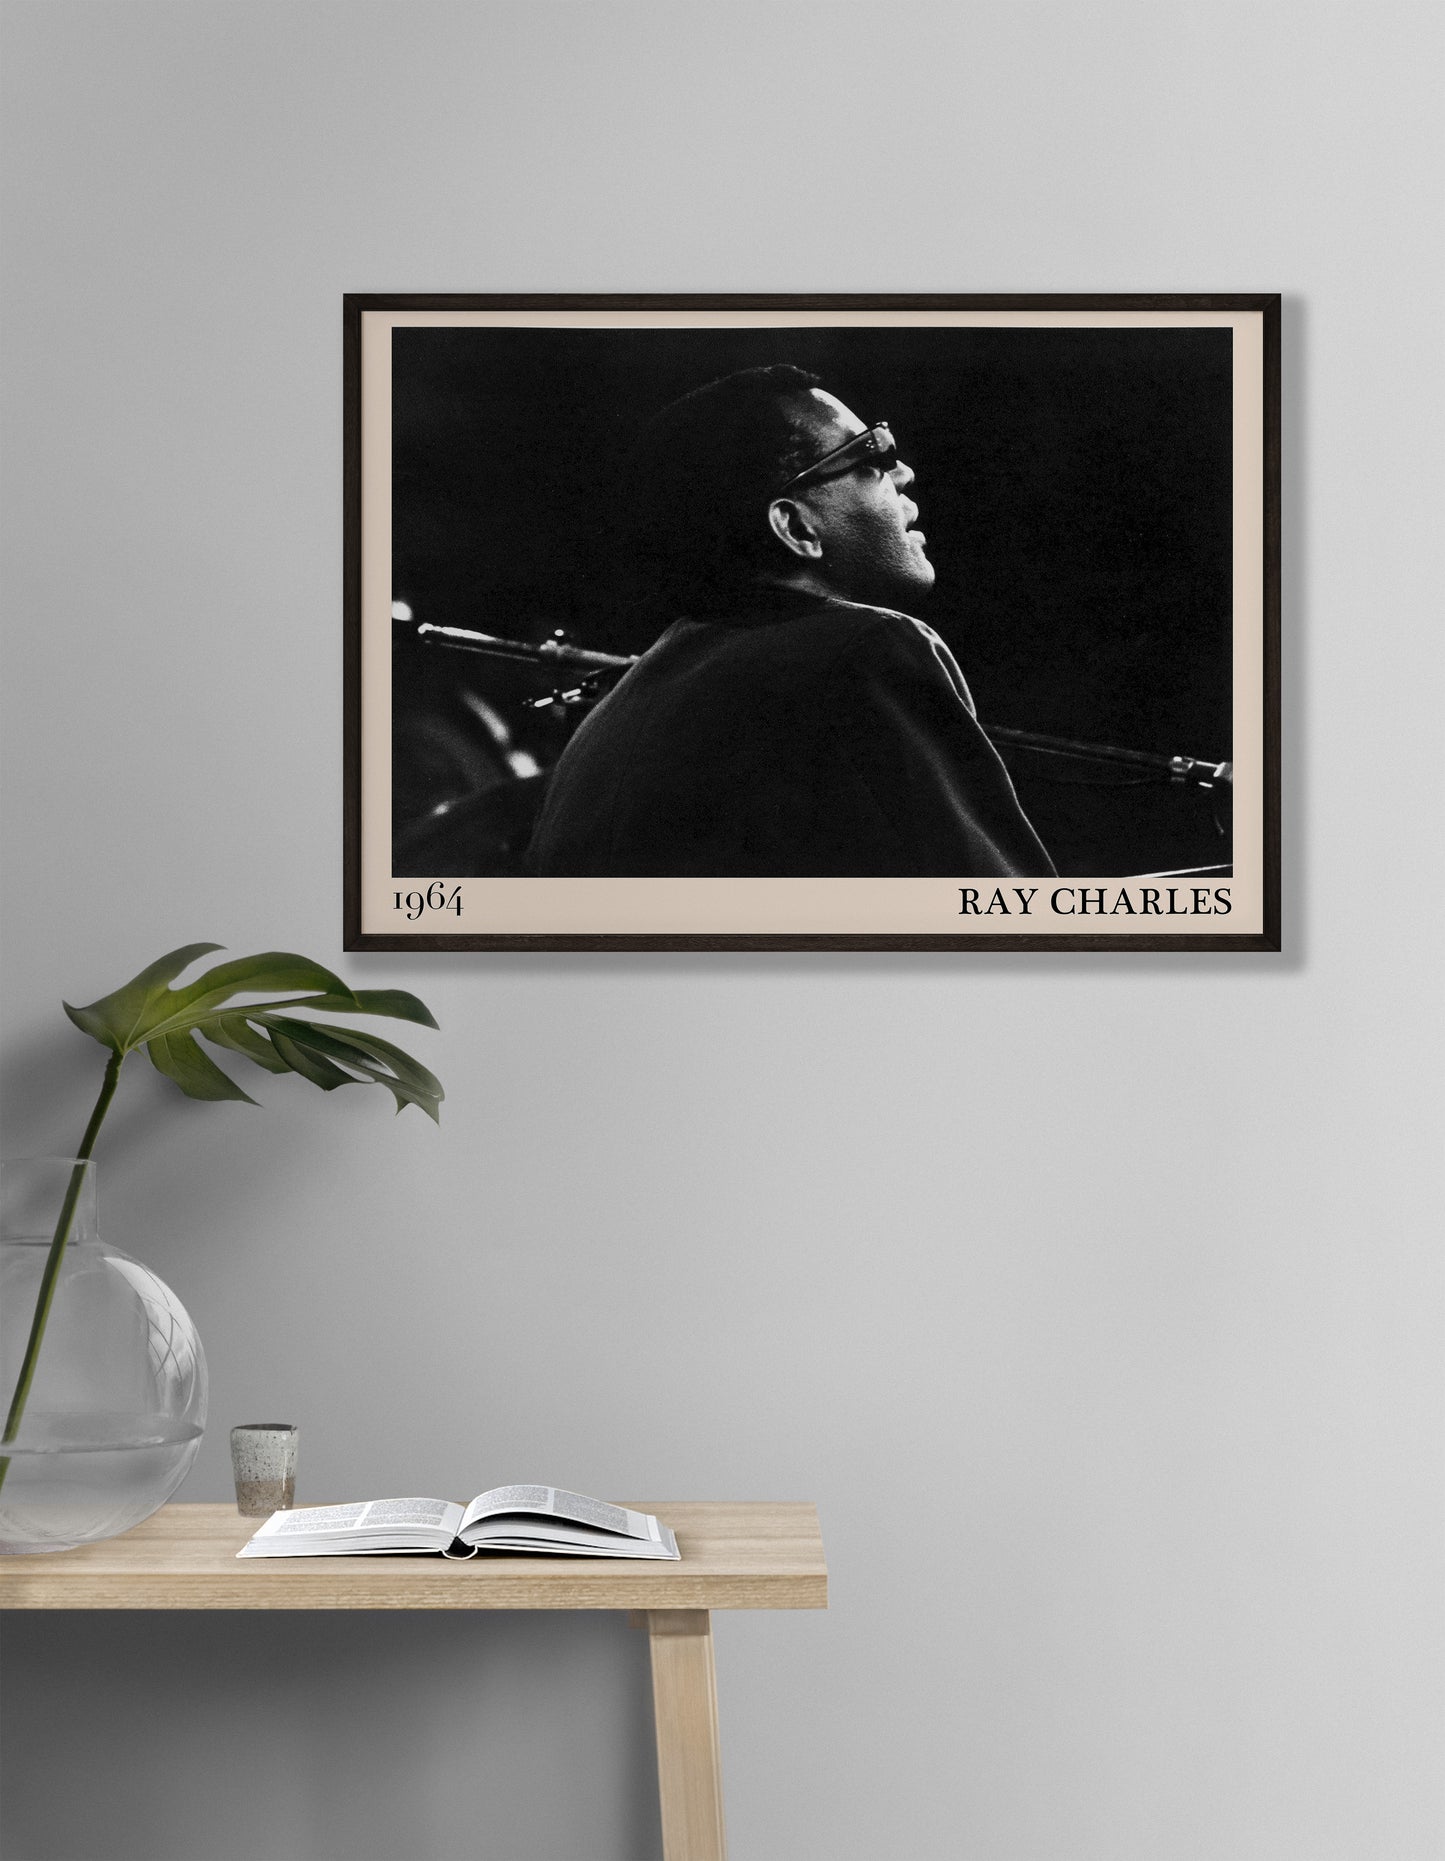  1964 photograph of blues legend Ray Charles, transformed into a cool black-framed poster hanging on a white living room wall